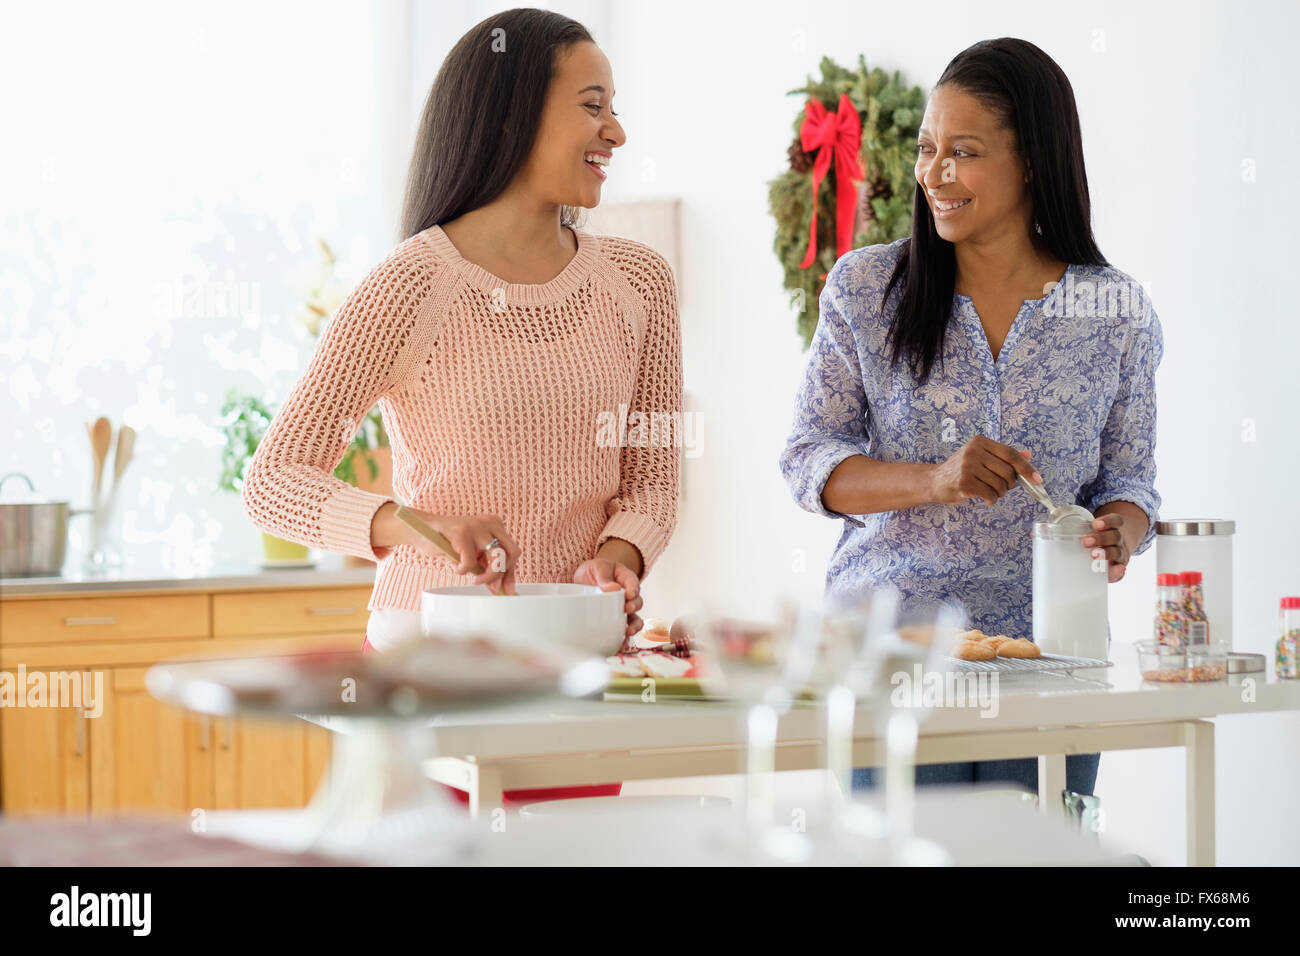 Mother and daughter baking in kitchen Stock Photo